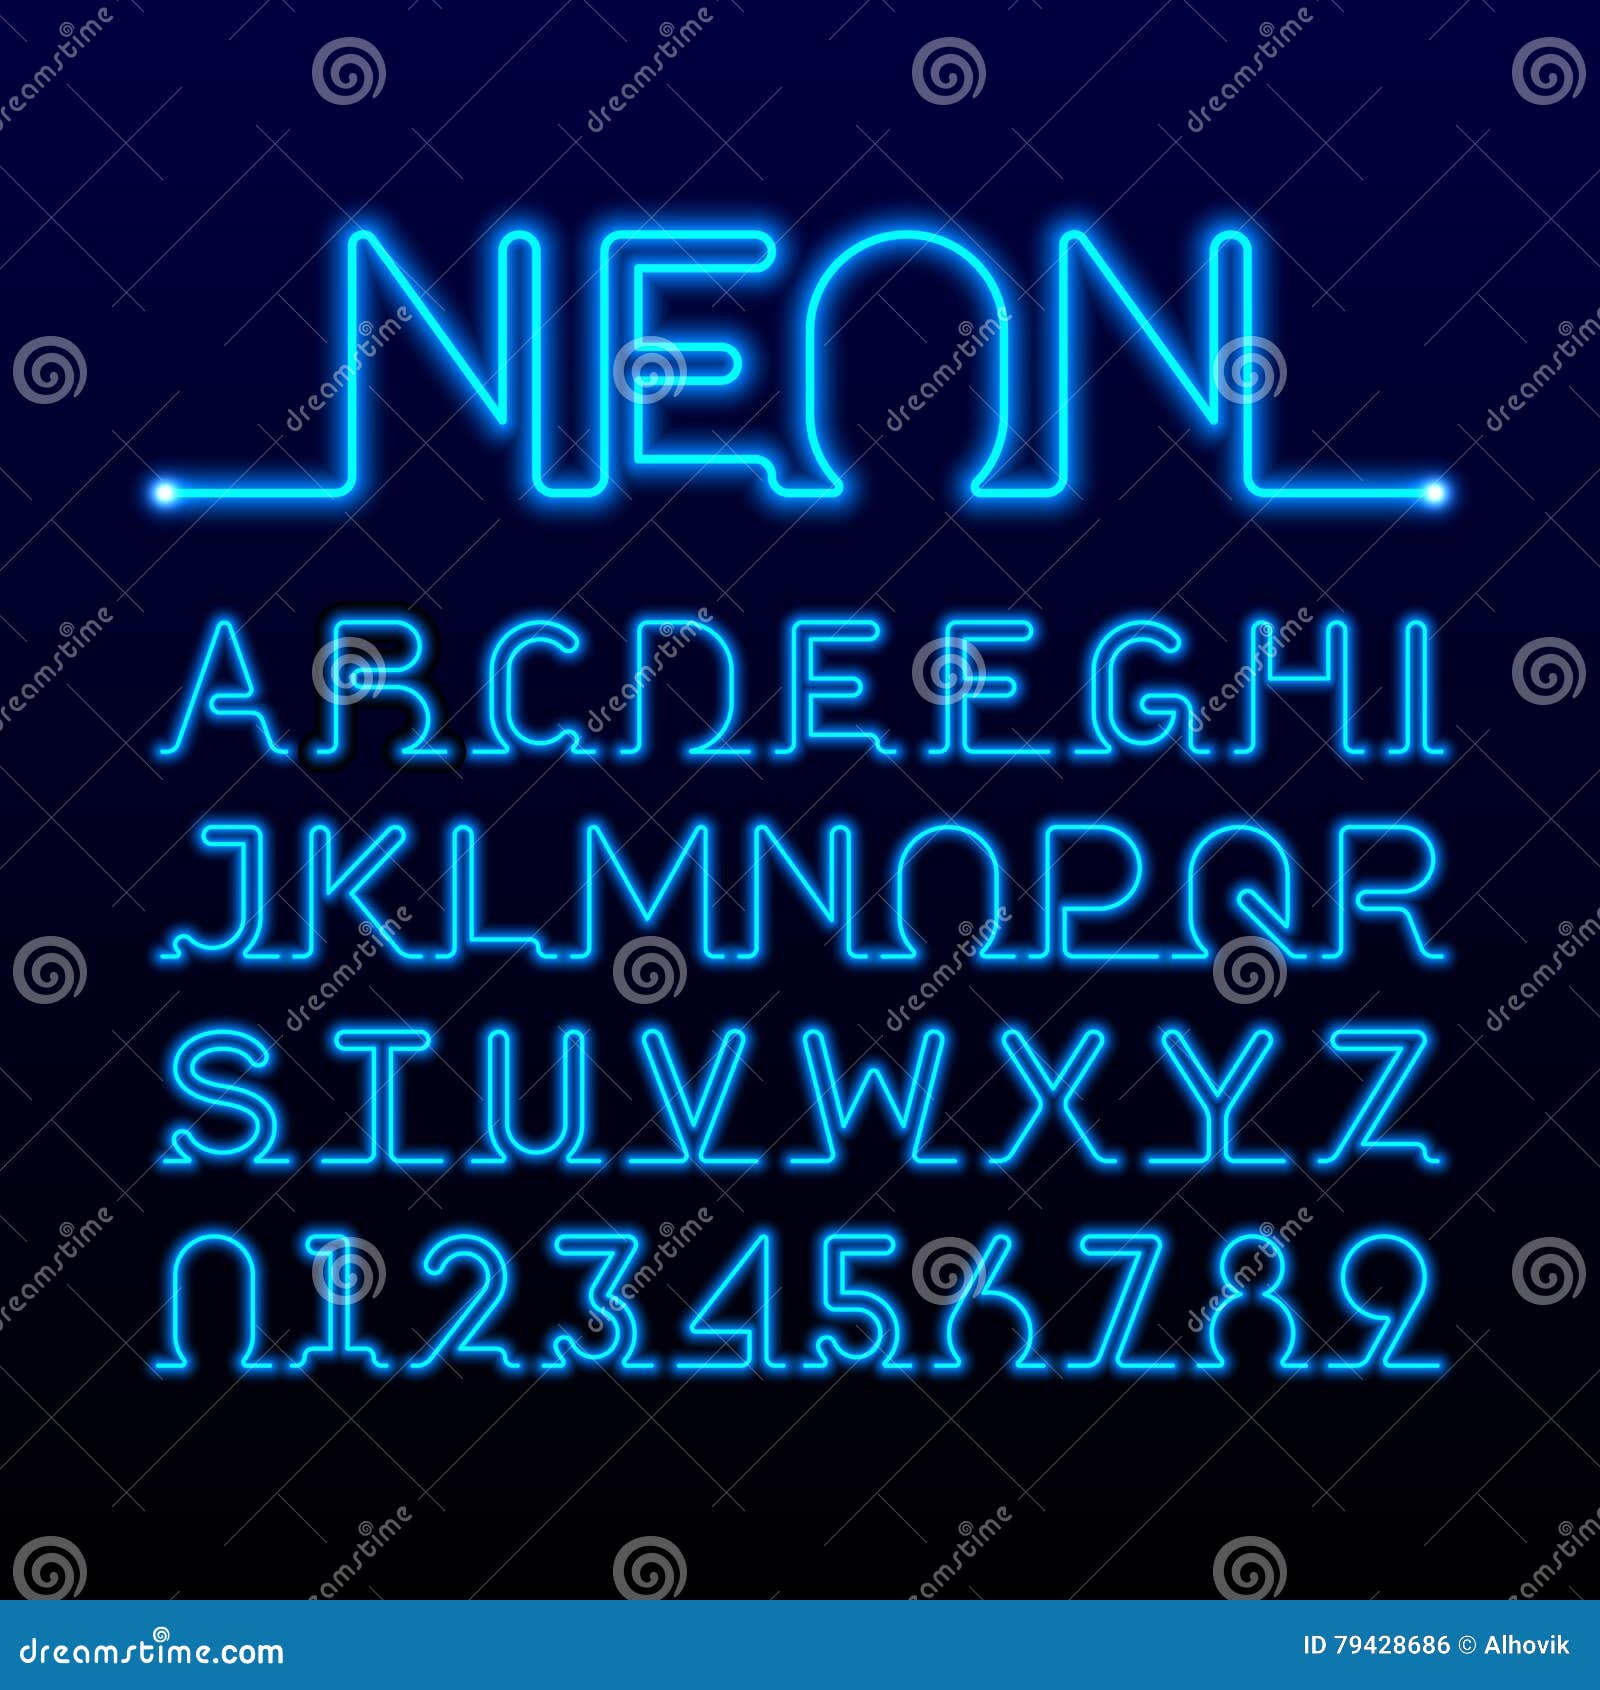 One thin line neon font stock vector. Illustration of colorful - 79428686